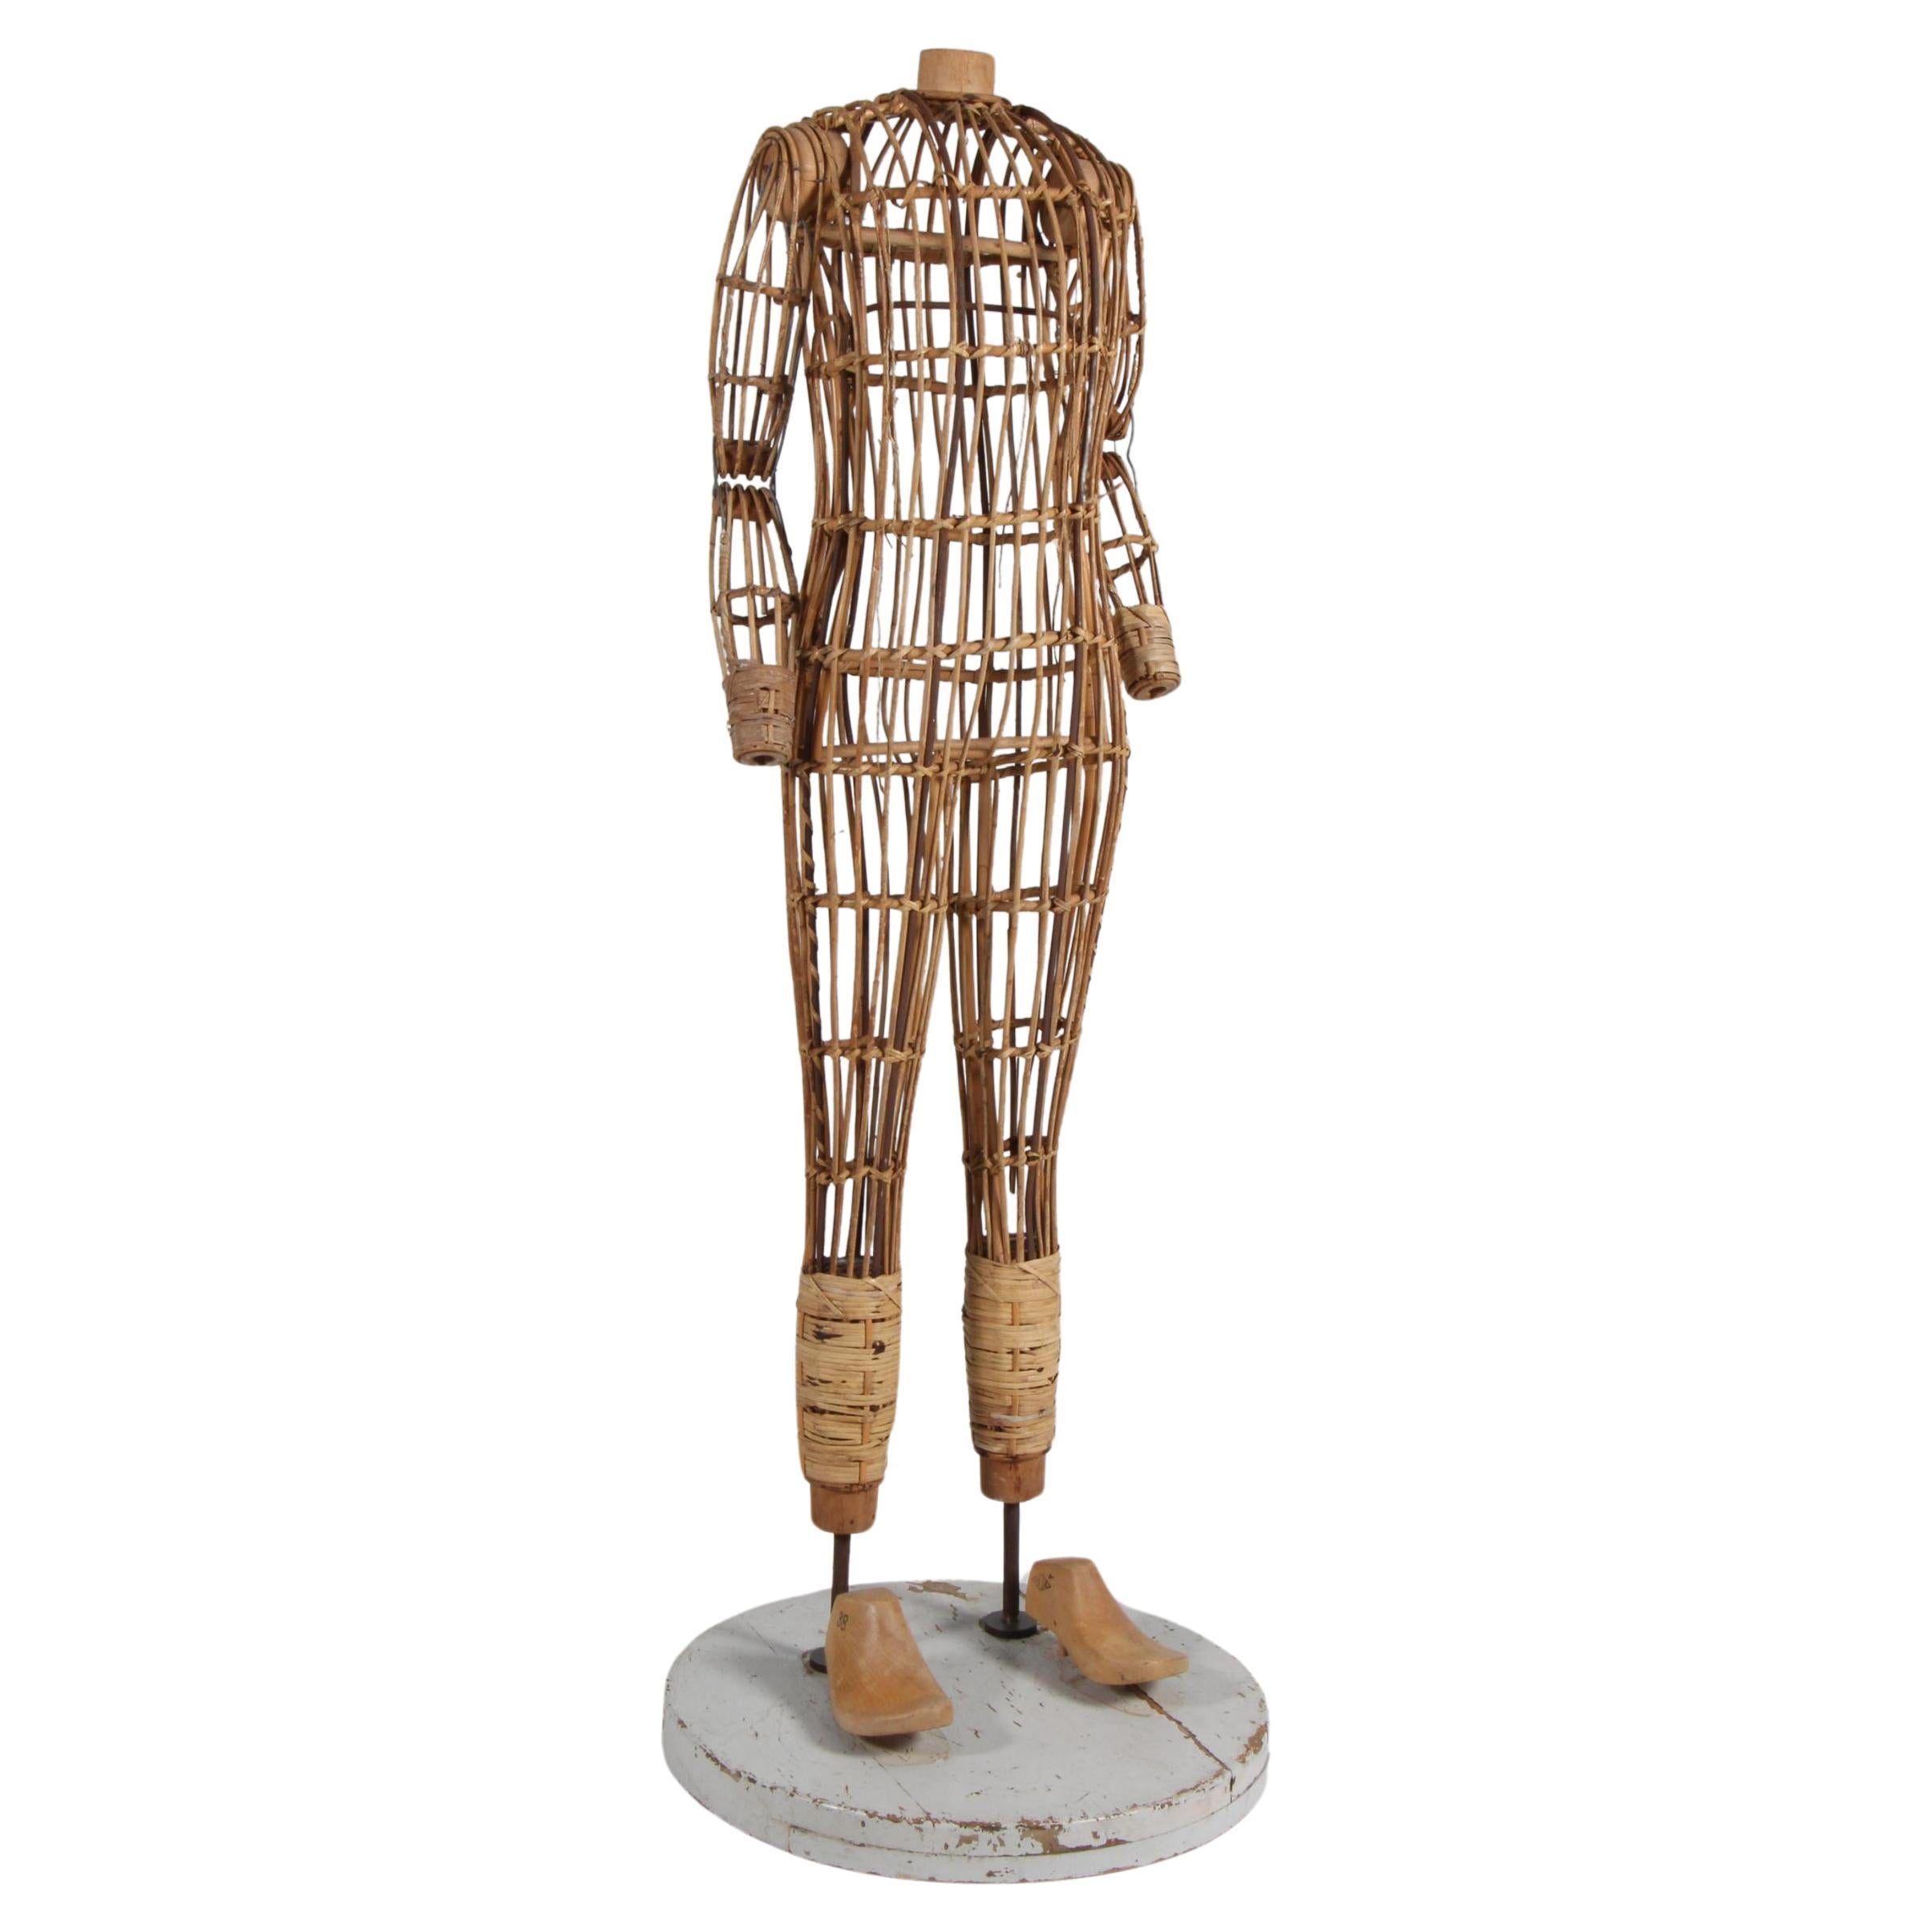 Anitque Mannequin in bamboo, cane, wood and steel